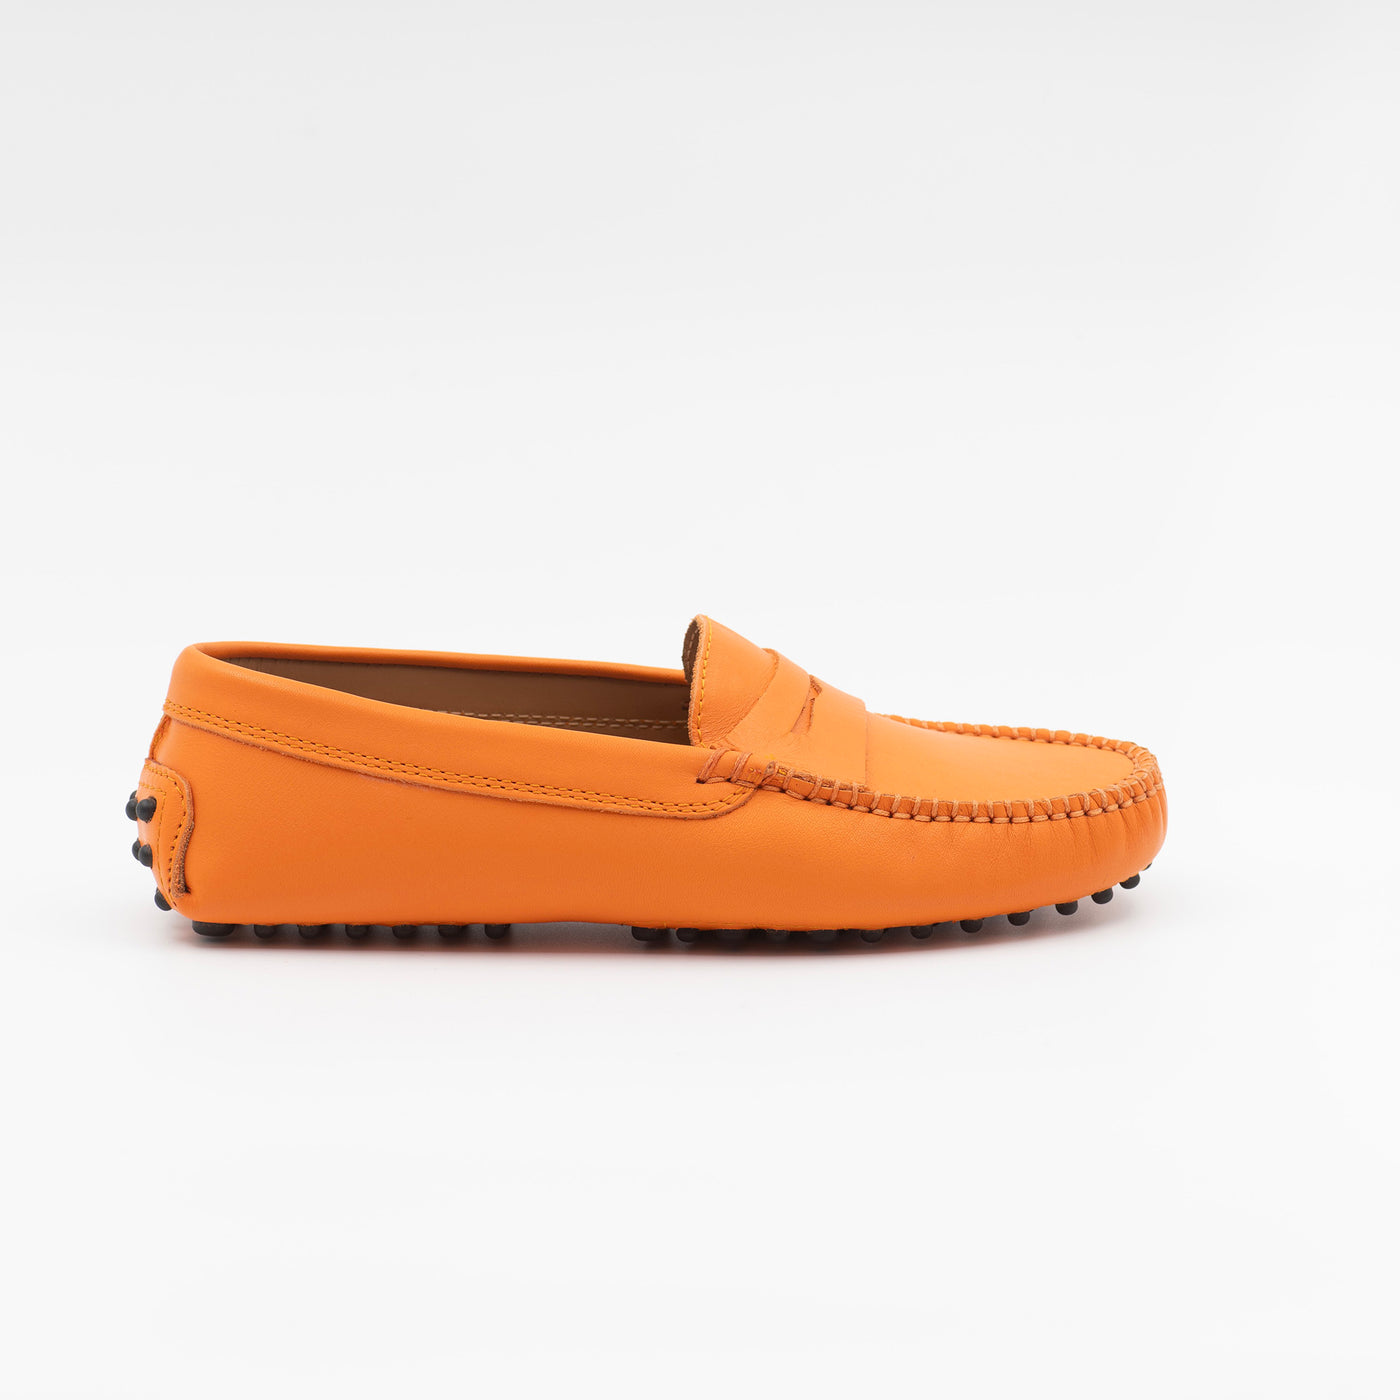 Gommino loafer in orange leather